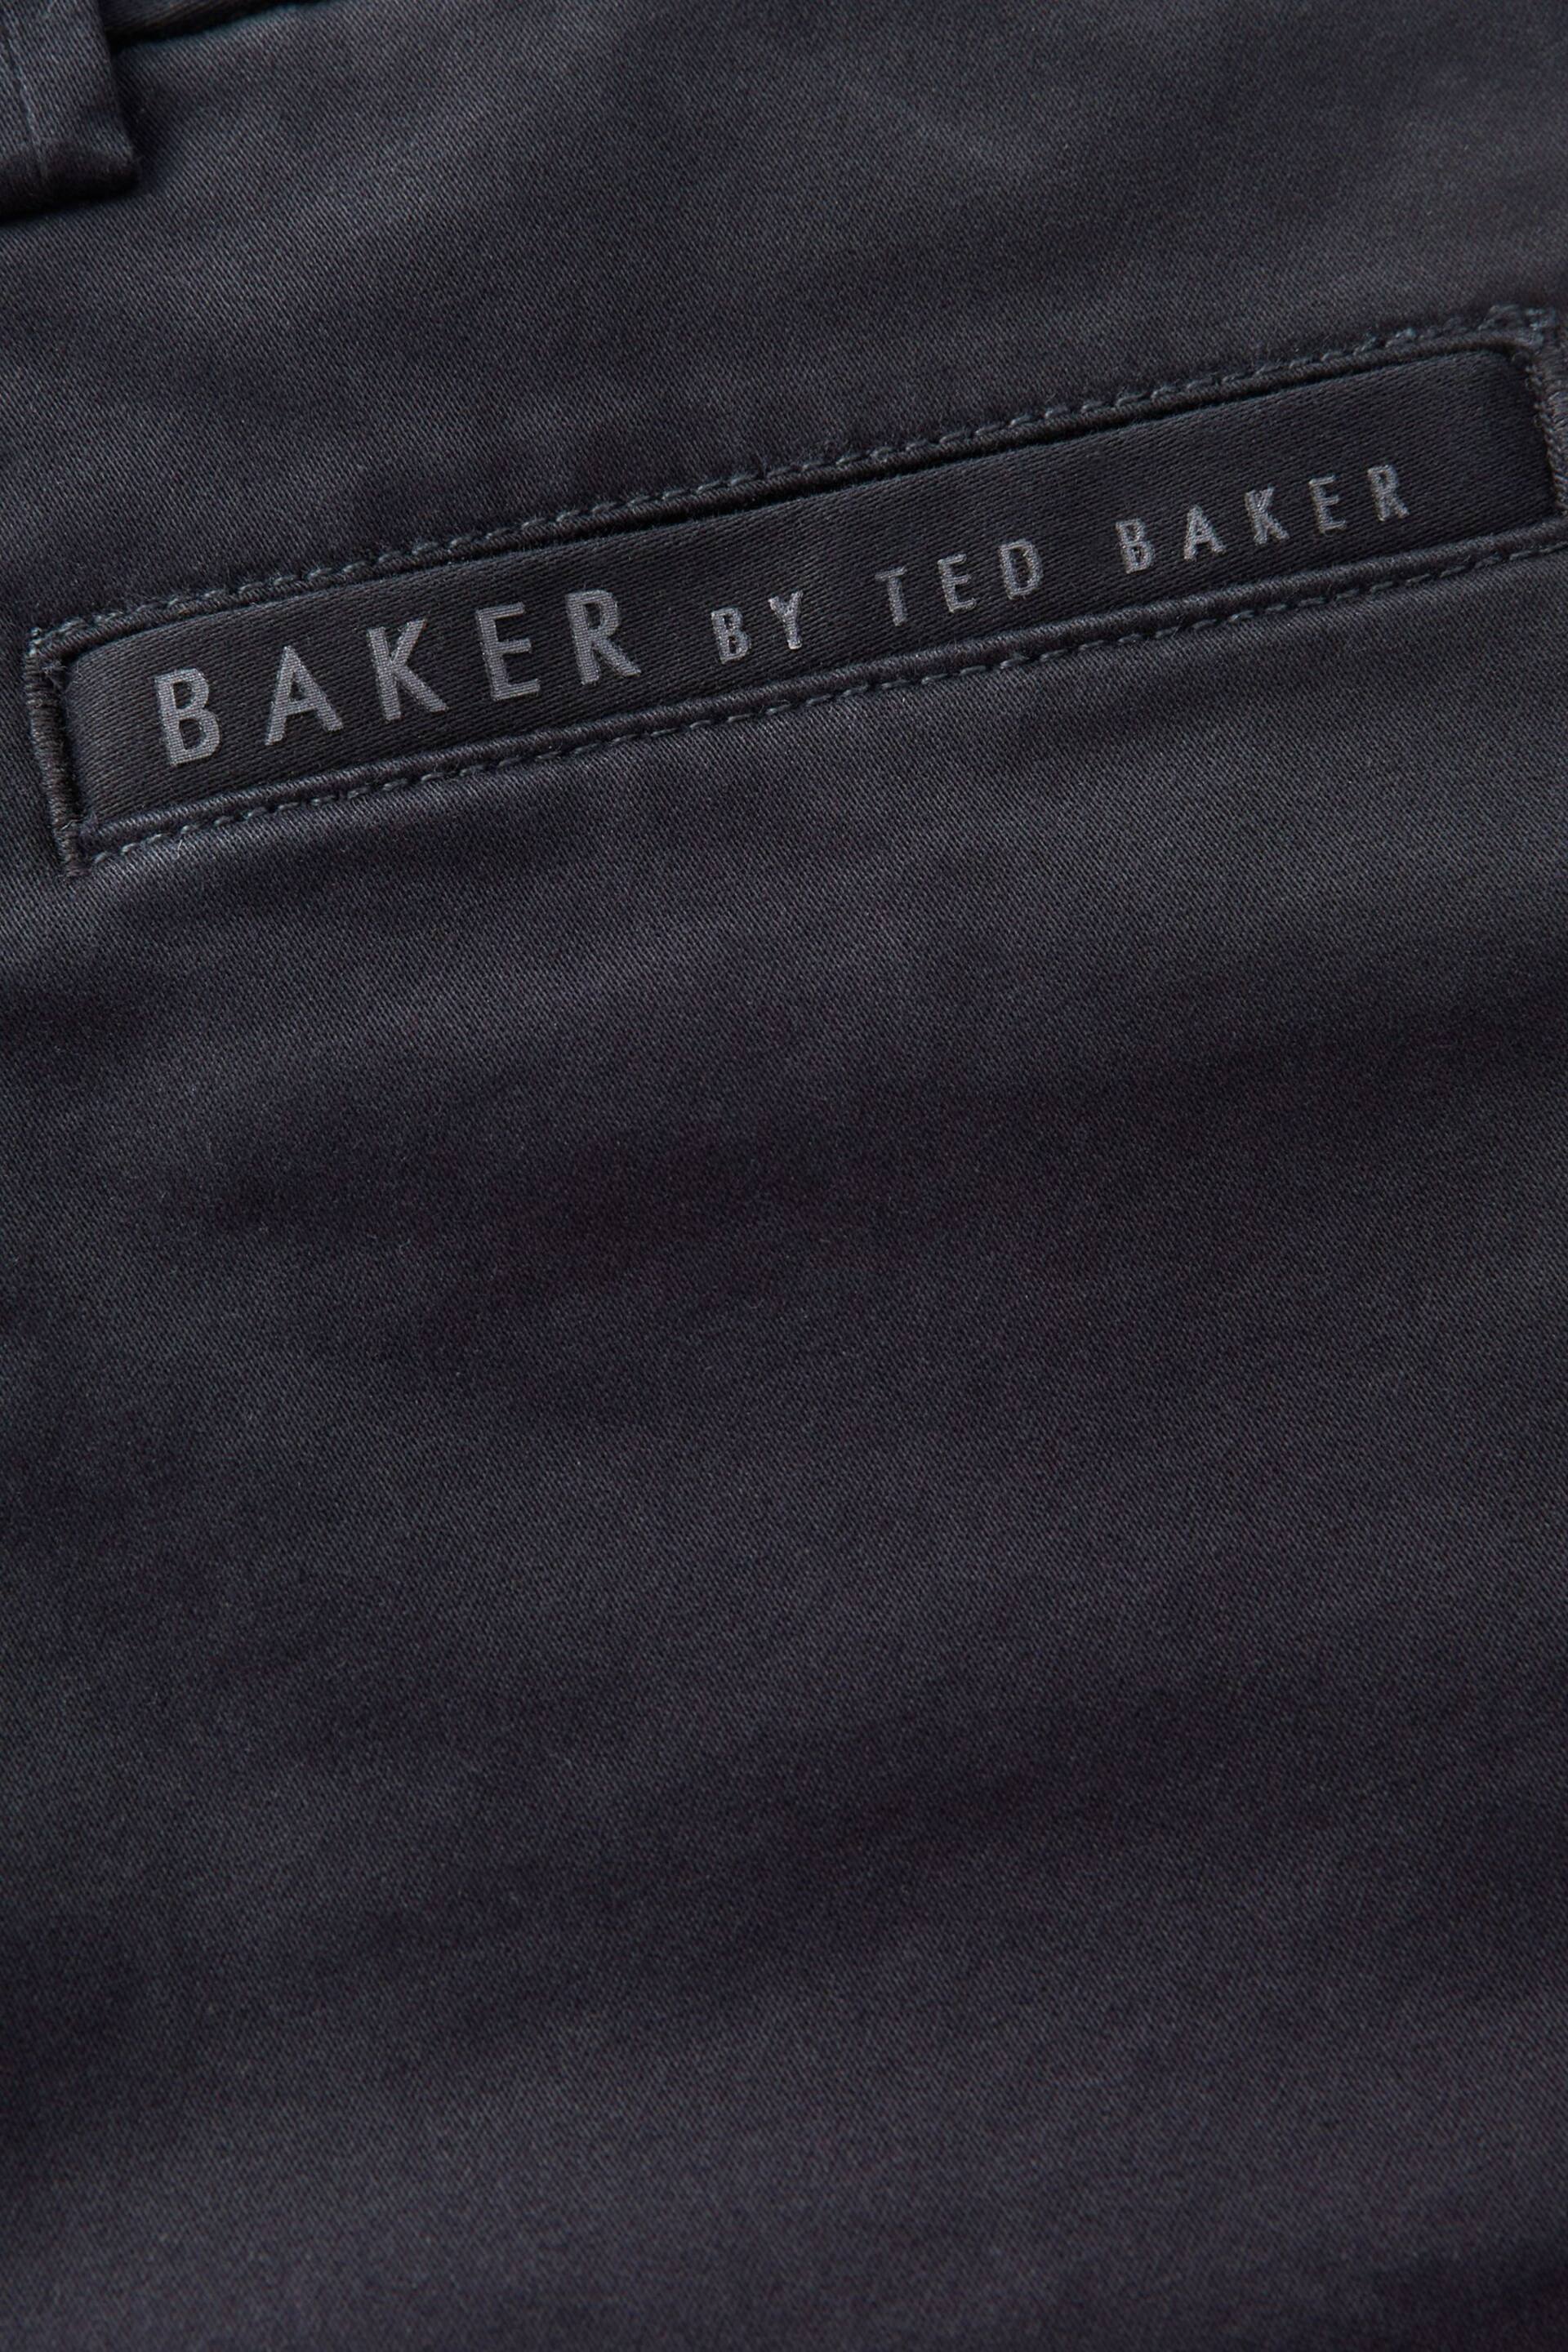 Baker by Ted Baker Chinos - Image 4 of 4